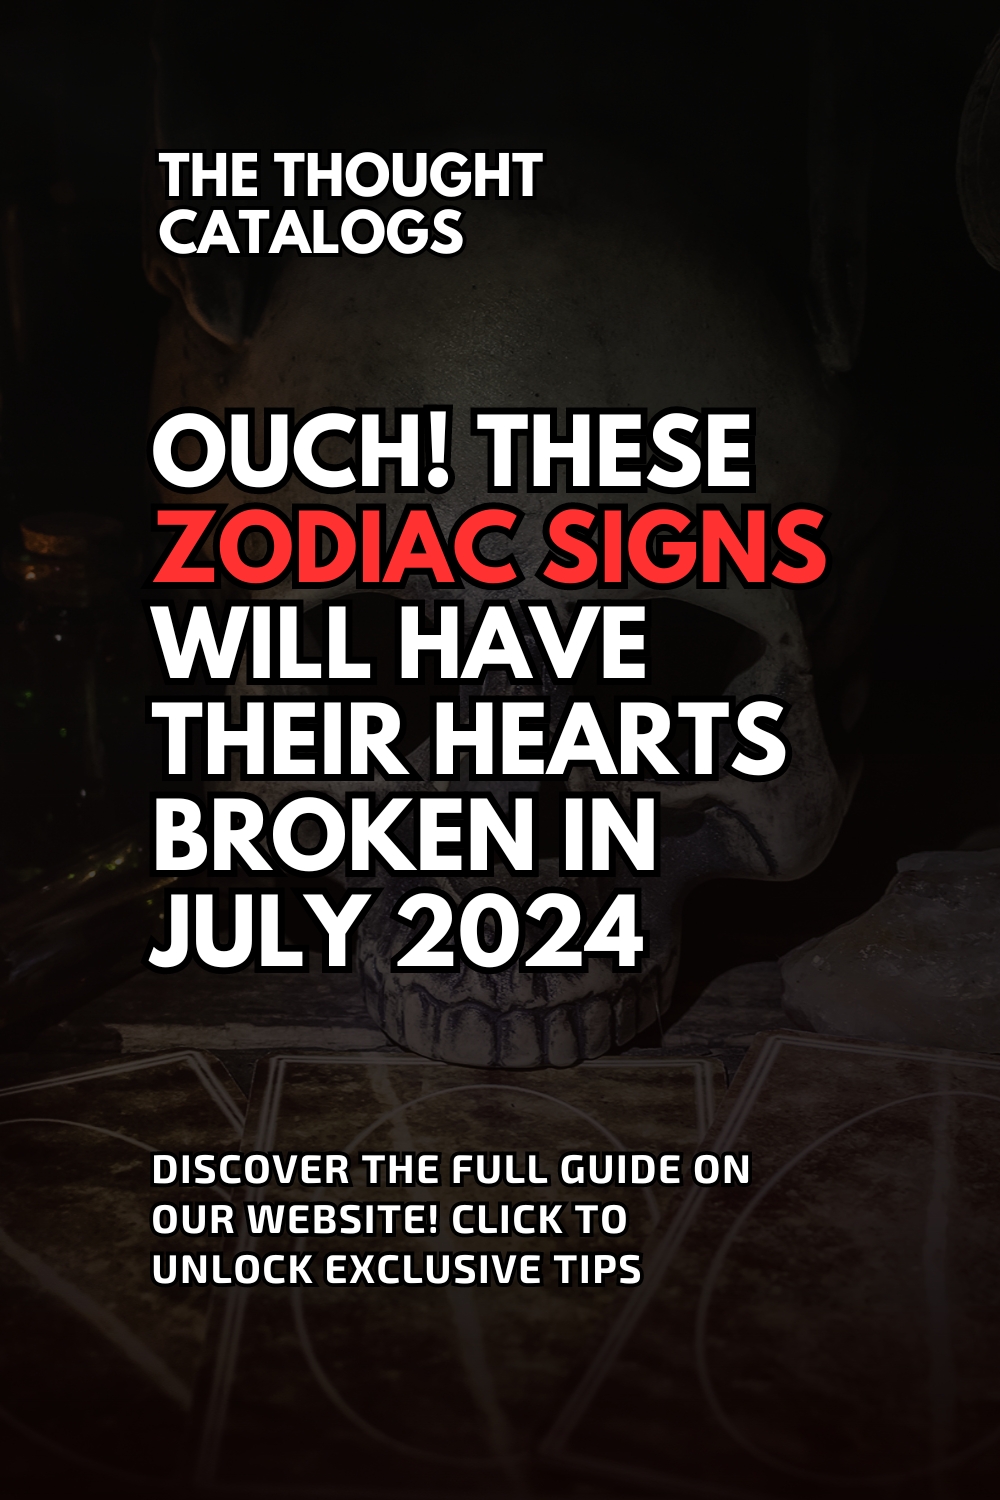 Ouch! These Zodiac Signs Will Have Their Hearts Broken In July 2024